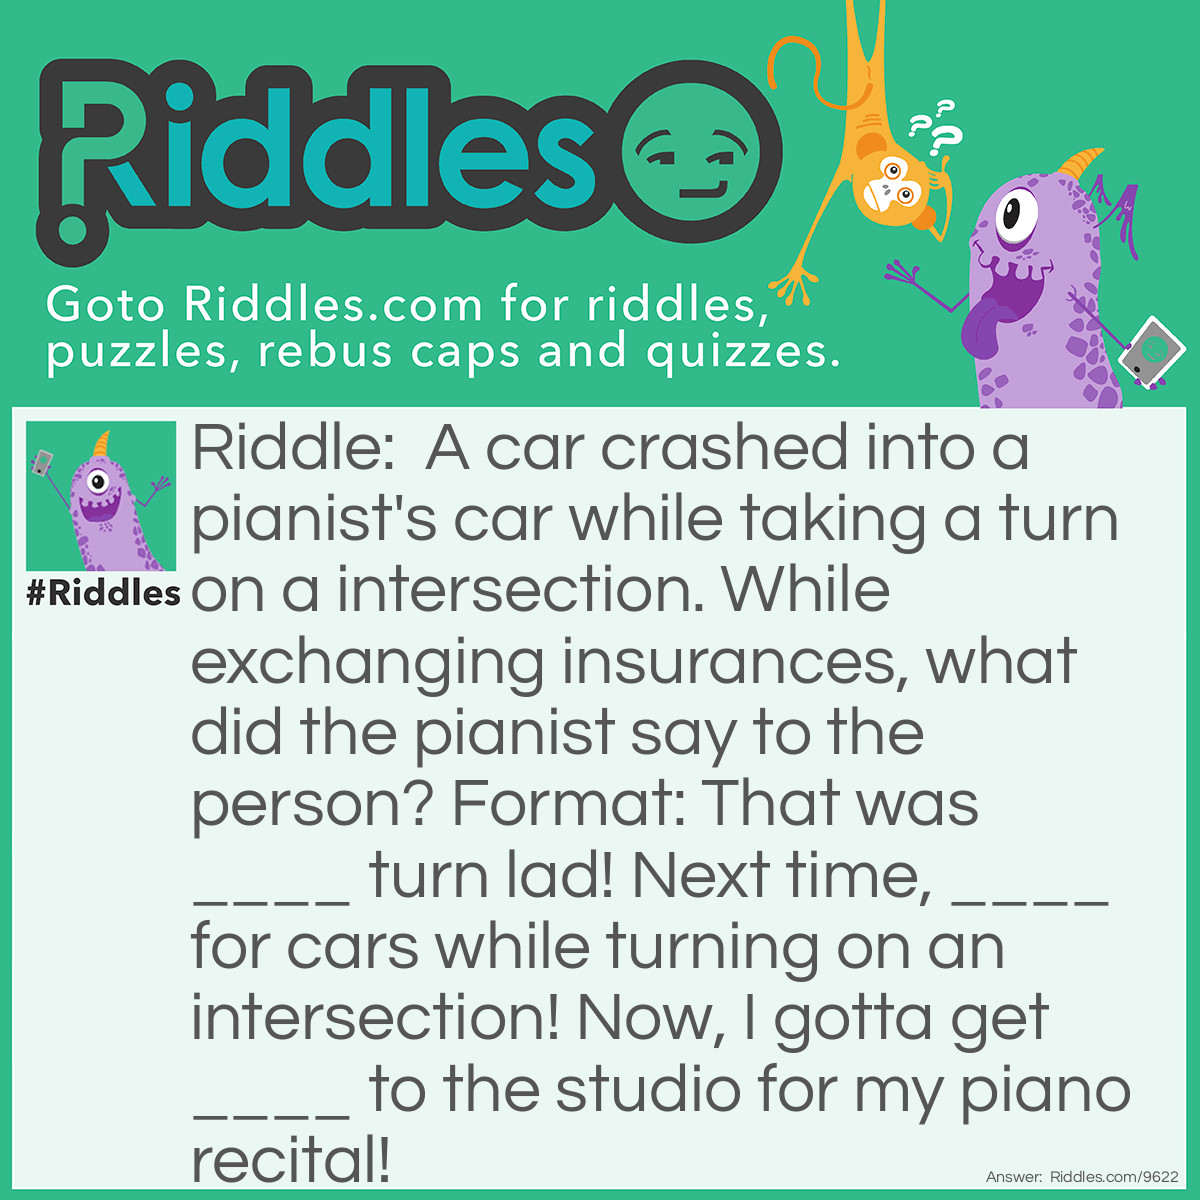 Riddle: A car crashed into a pianist's car while taking a turn on a intersection. While exchanging insurances, what did the pianist say to the person? Format: That was ____ turn lad! Next time, ____ for cars while turning on an intersection! Now, I gotta get ____ to the studio for my piano recital! Answer: That was A-Sharp turn lad! Next time, B-Sharp for cars while turning on an intersection! Now, I gotta get Bach to the studio for my piano recital!